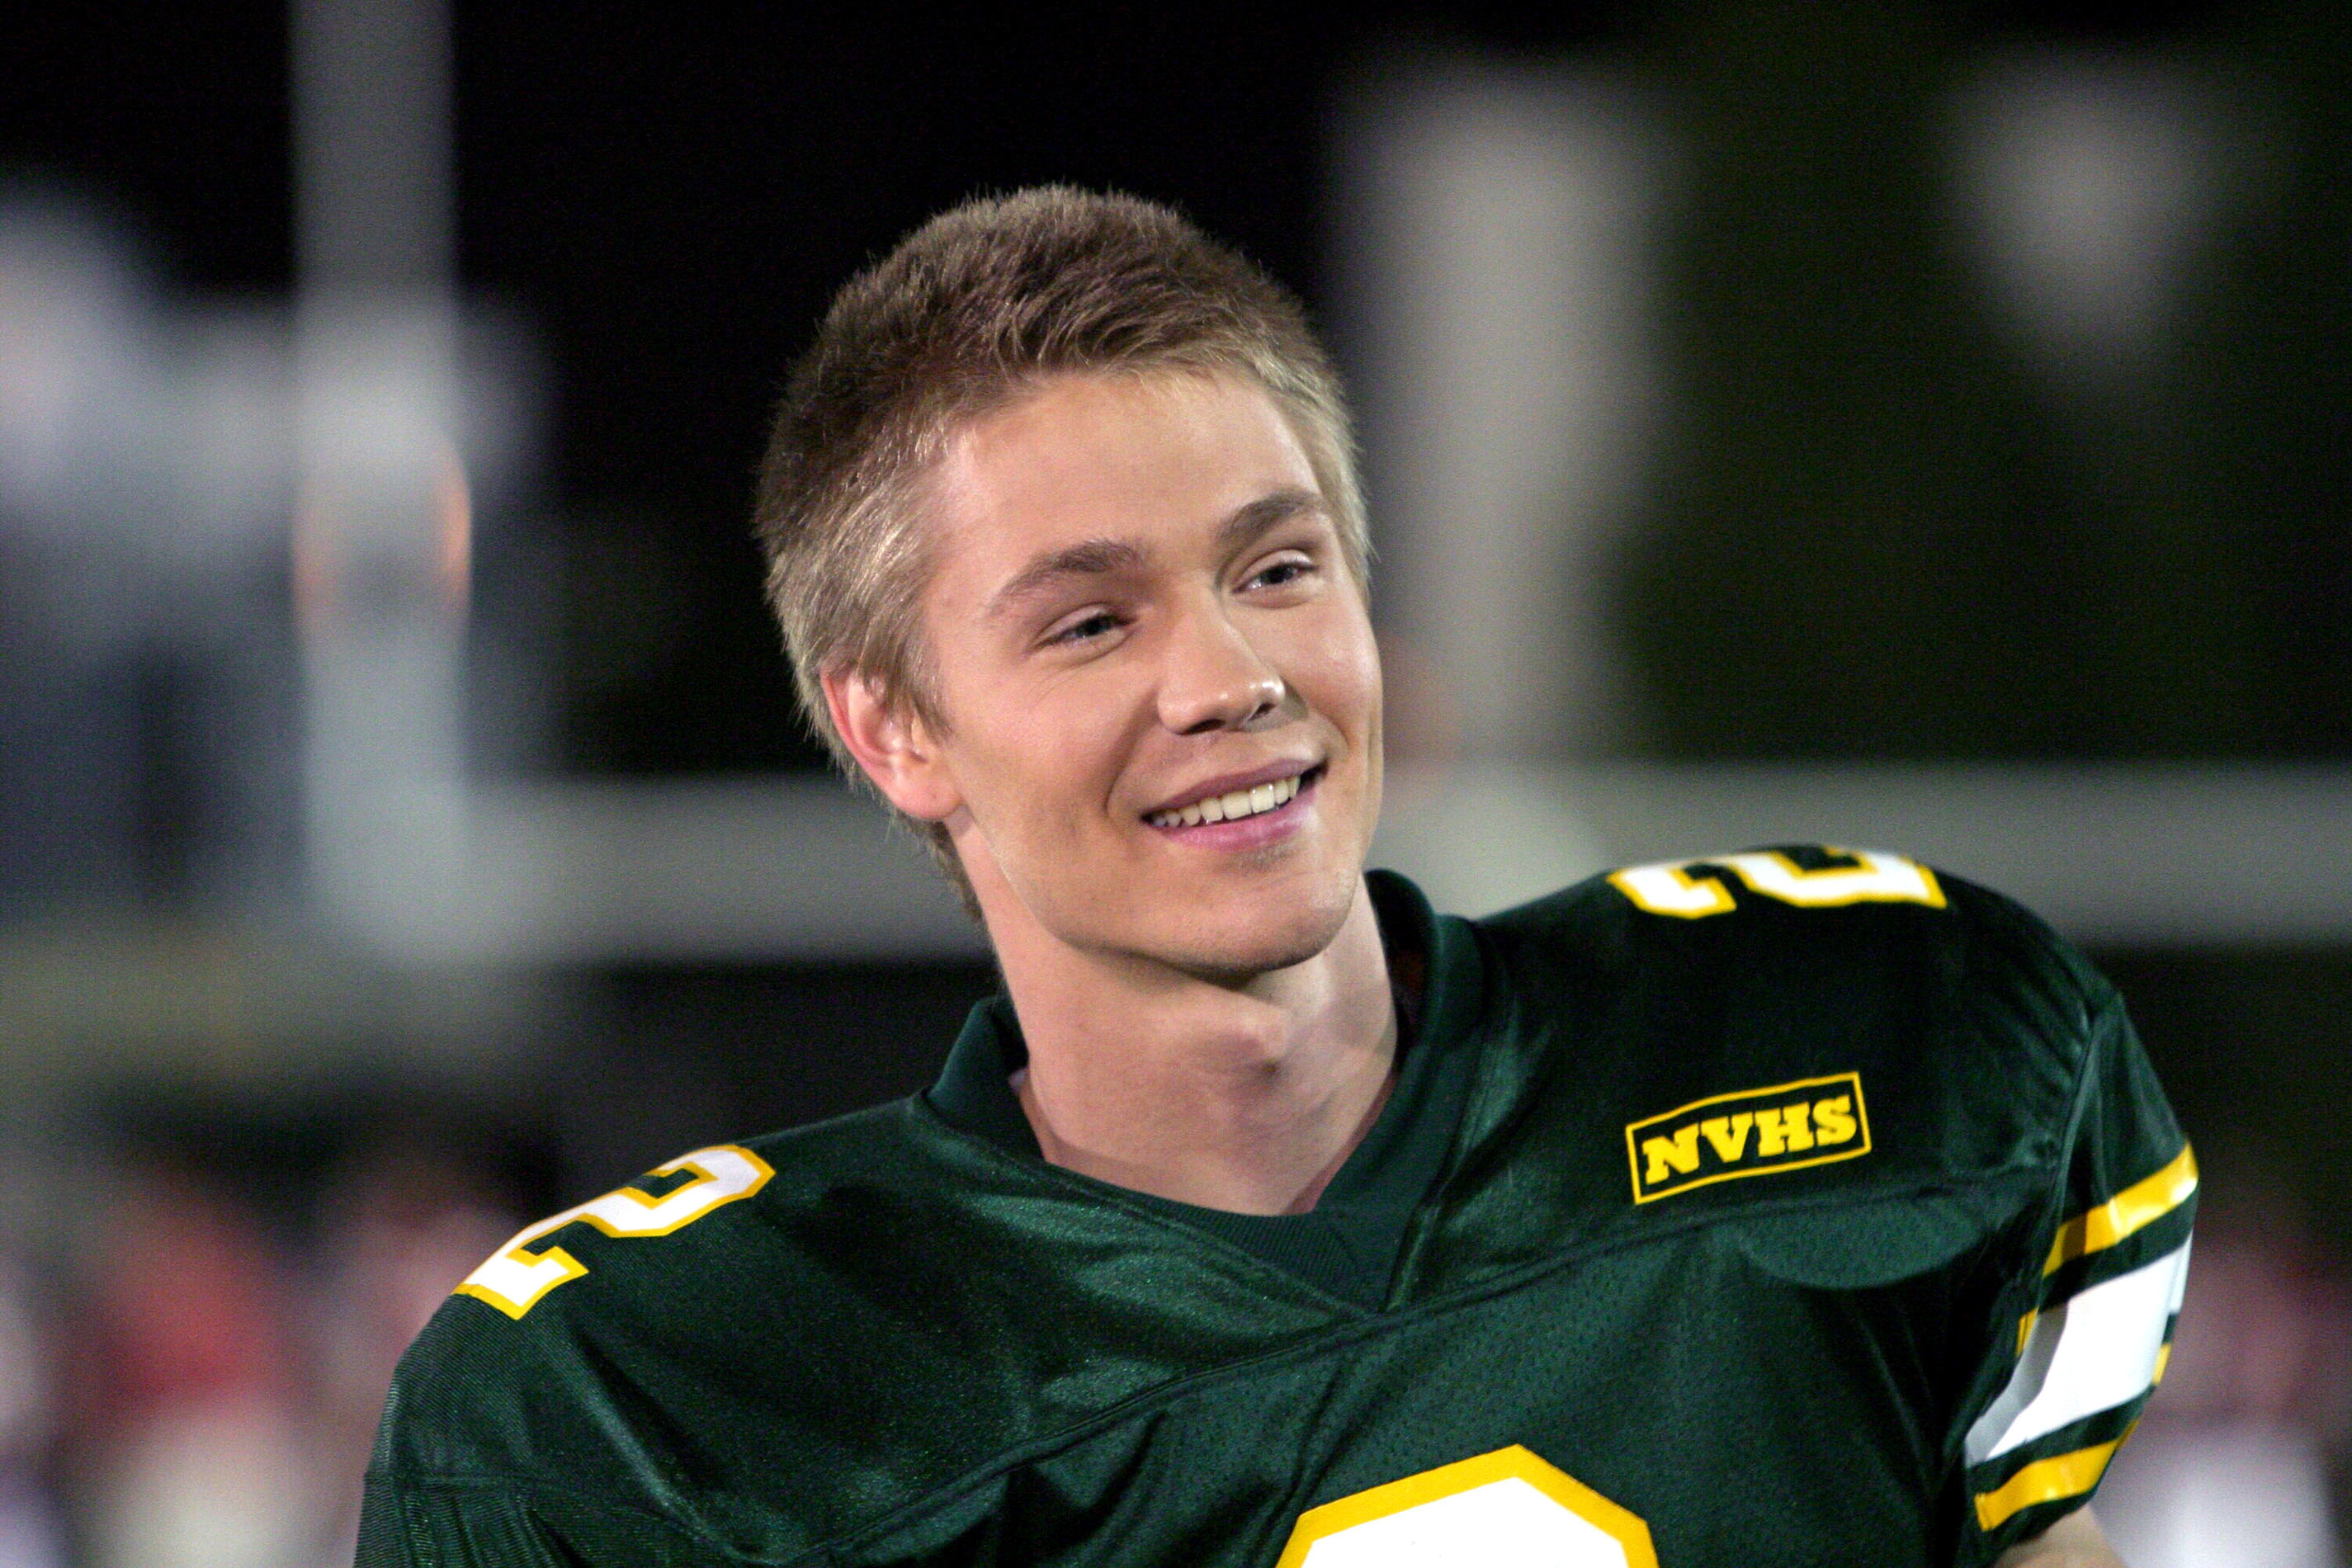 Actor Chad Michael Murray in an athletic uniform